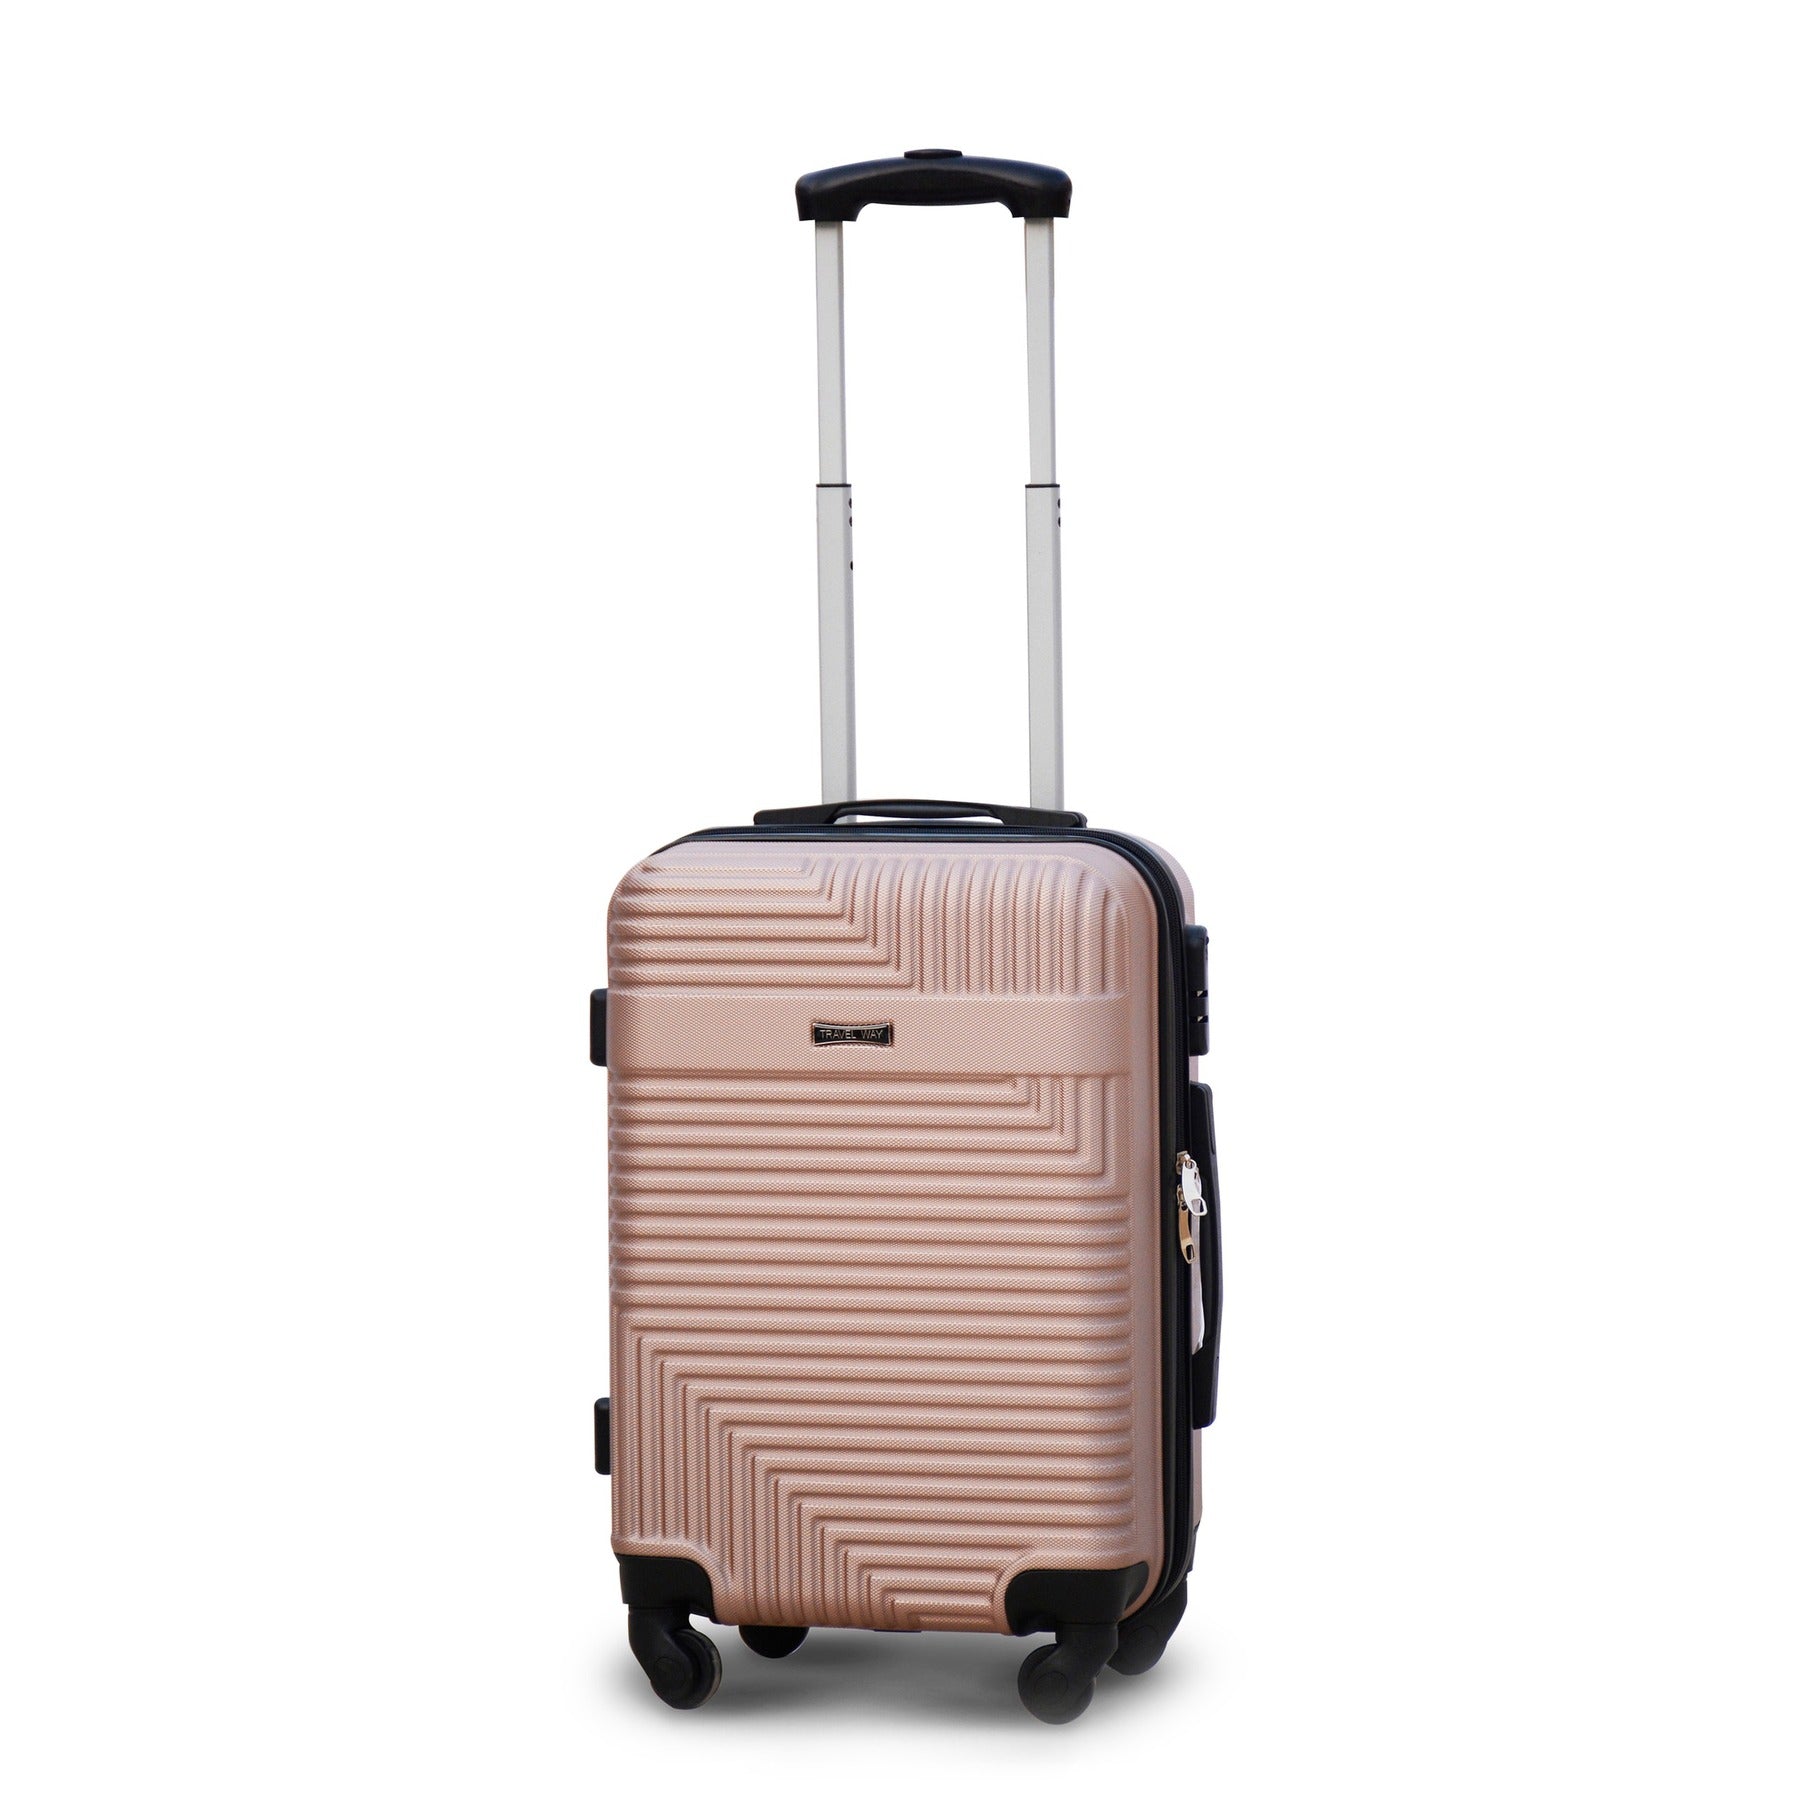 20" Rose Gold Colour Travel Way ABS Luggage Lightweight Hard Case Trolley Bag